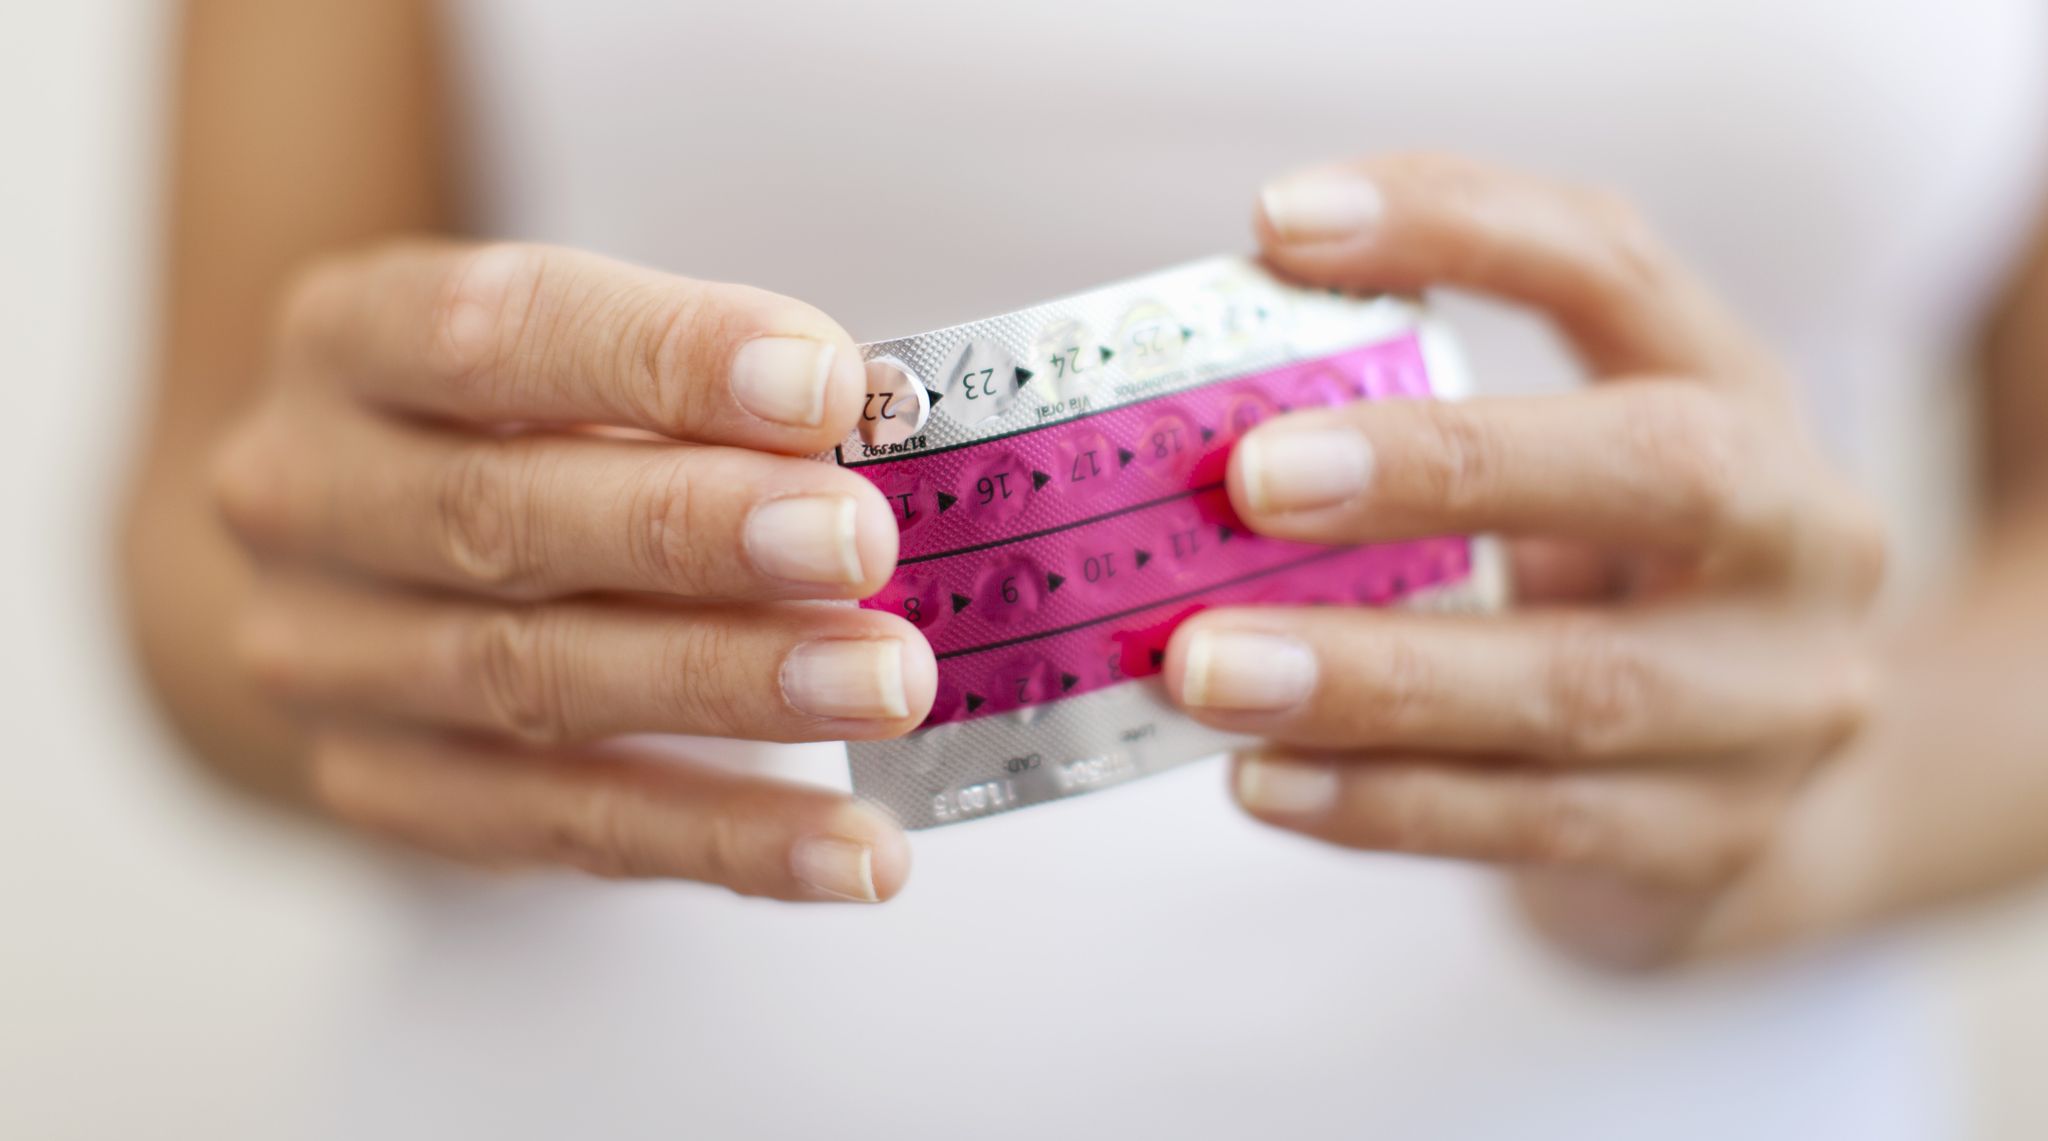 woman's hand holding birth control pills, cropped